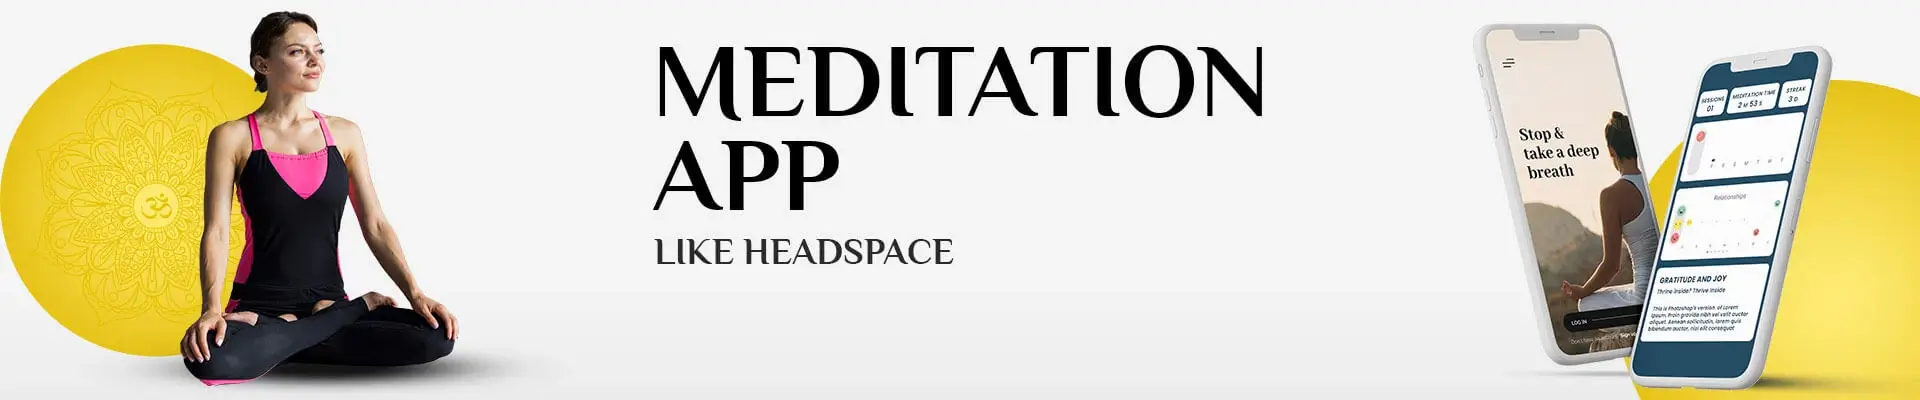 Top Guidelines to Create a Meditation App like Headspace